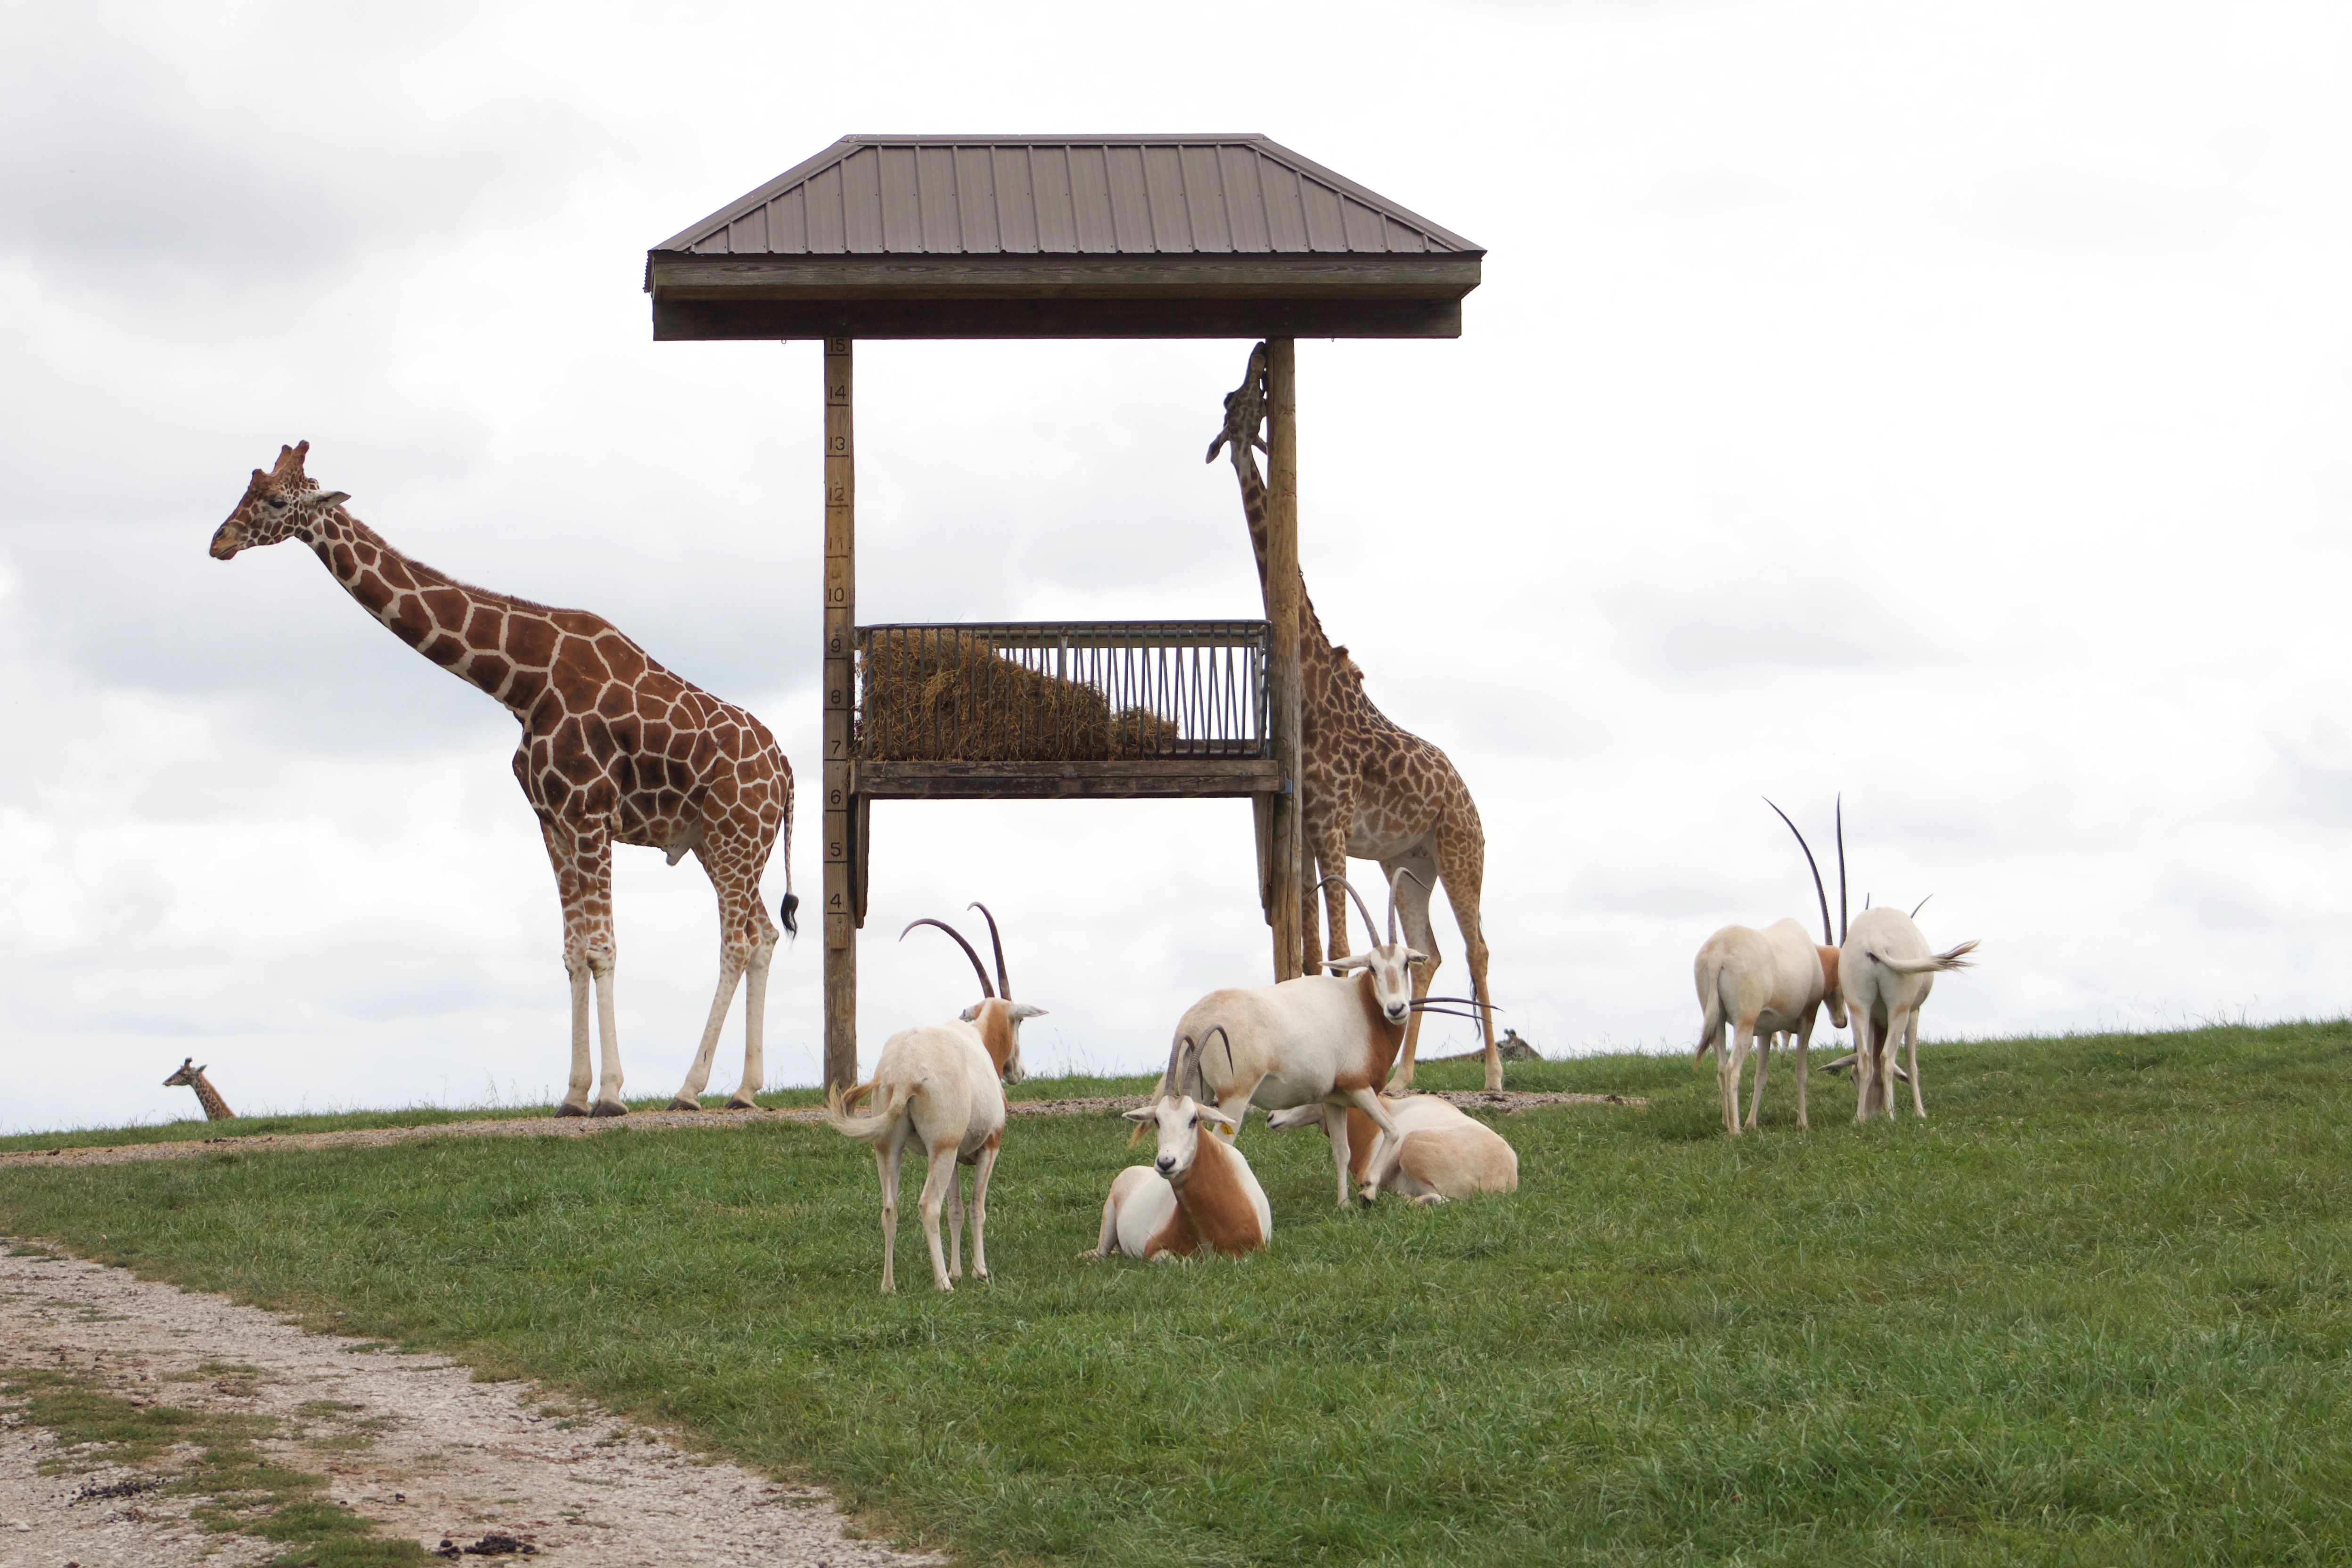 Giraffes feeding and Scimitar Horned Oxes together, in the same pasture